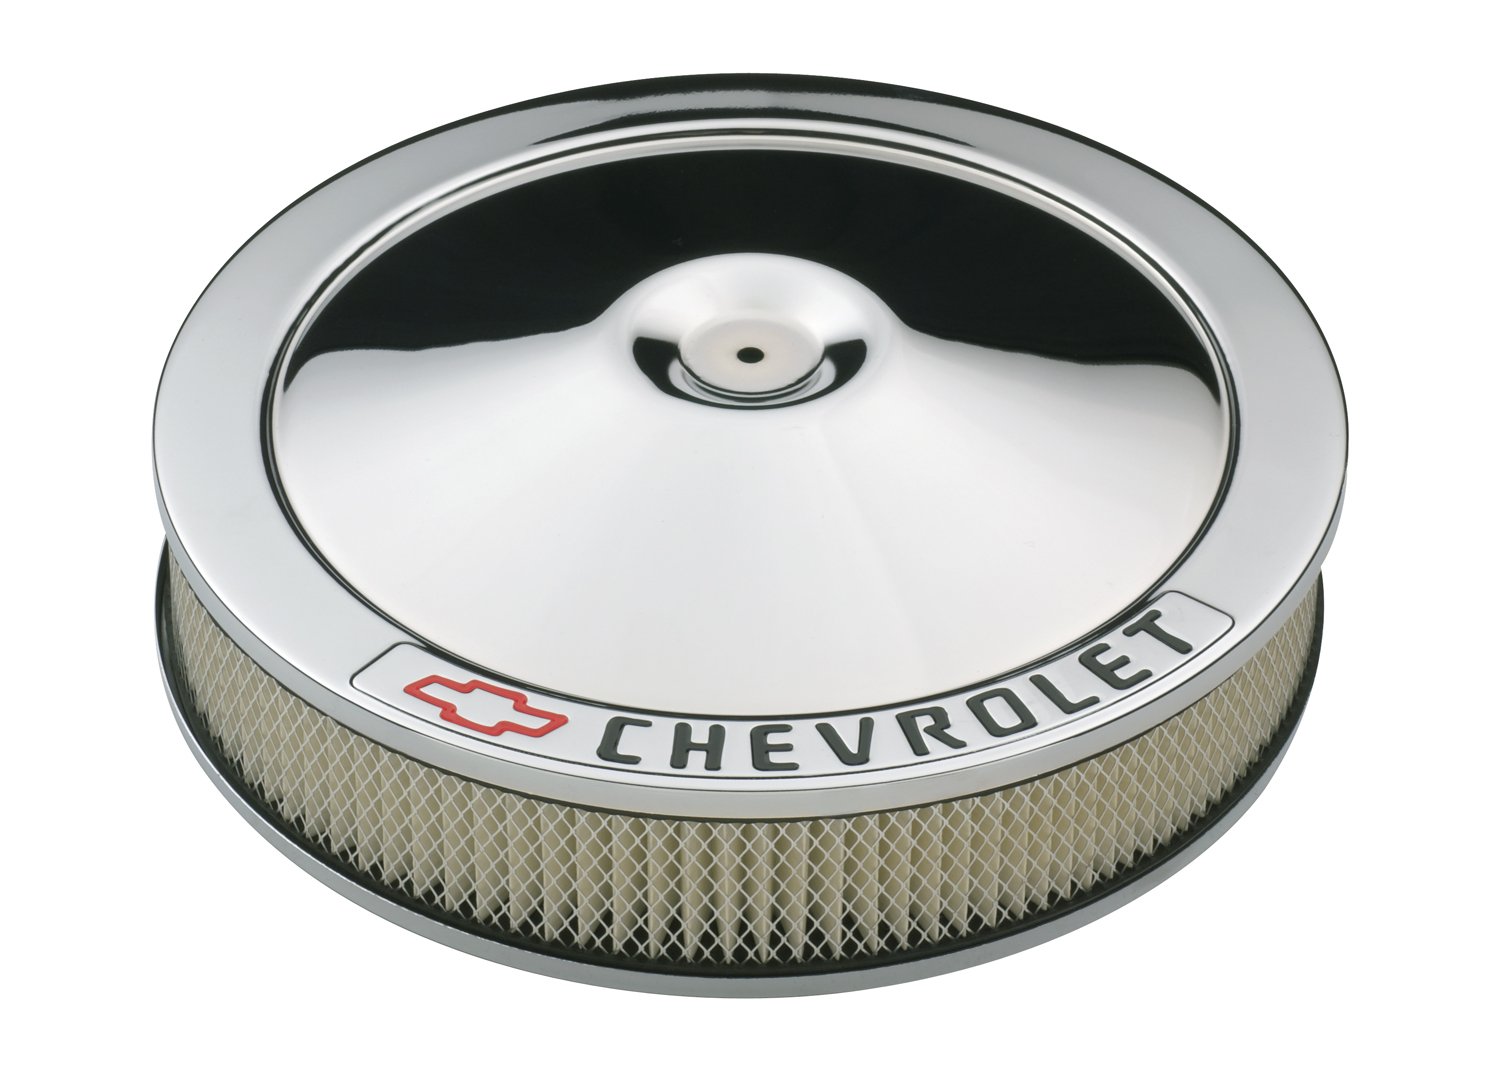 Proform 141-906 Chrome 14 Diameter Air Cleaner Kit with Black Chevrolet/Red Bowtie Logo and 3 Paper Filter by ProForm von ProForm